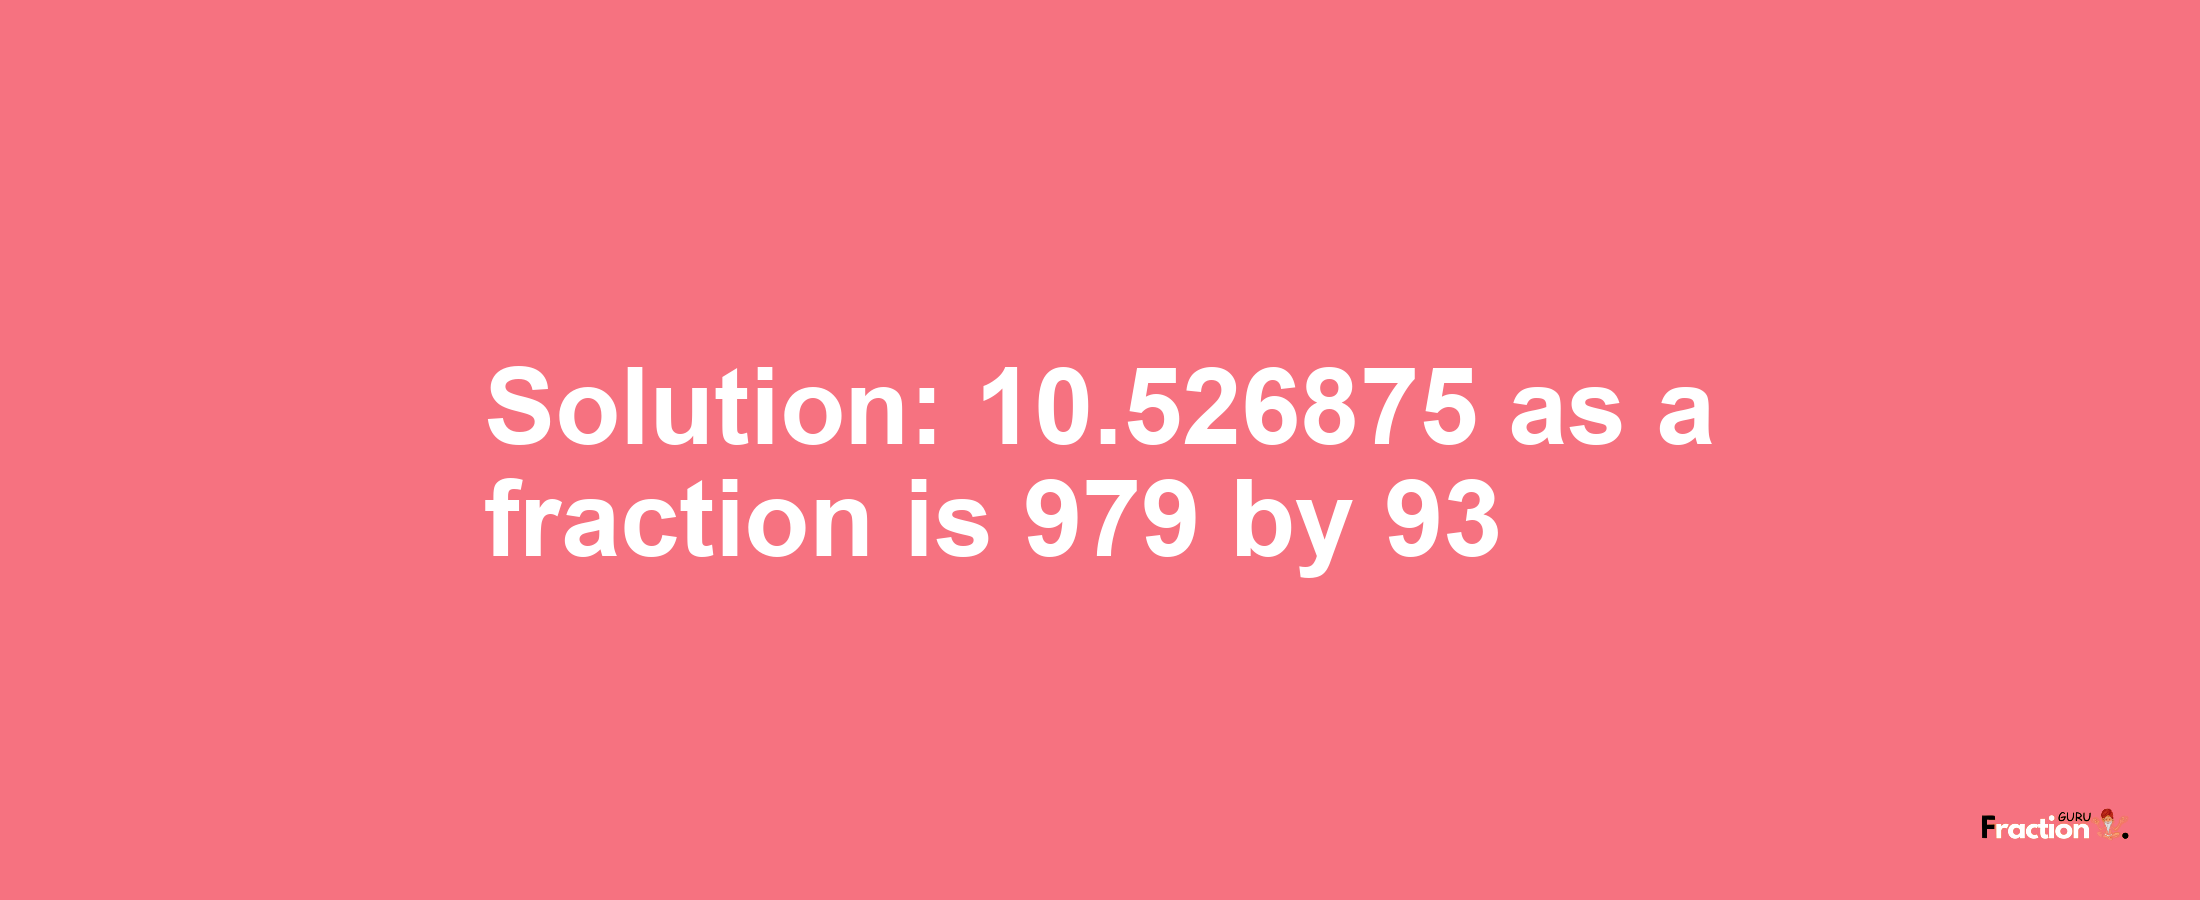 Solution:10.526875 as a fraction is 979/93